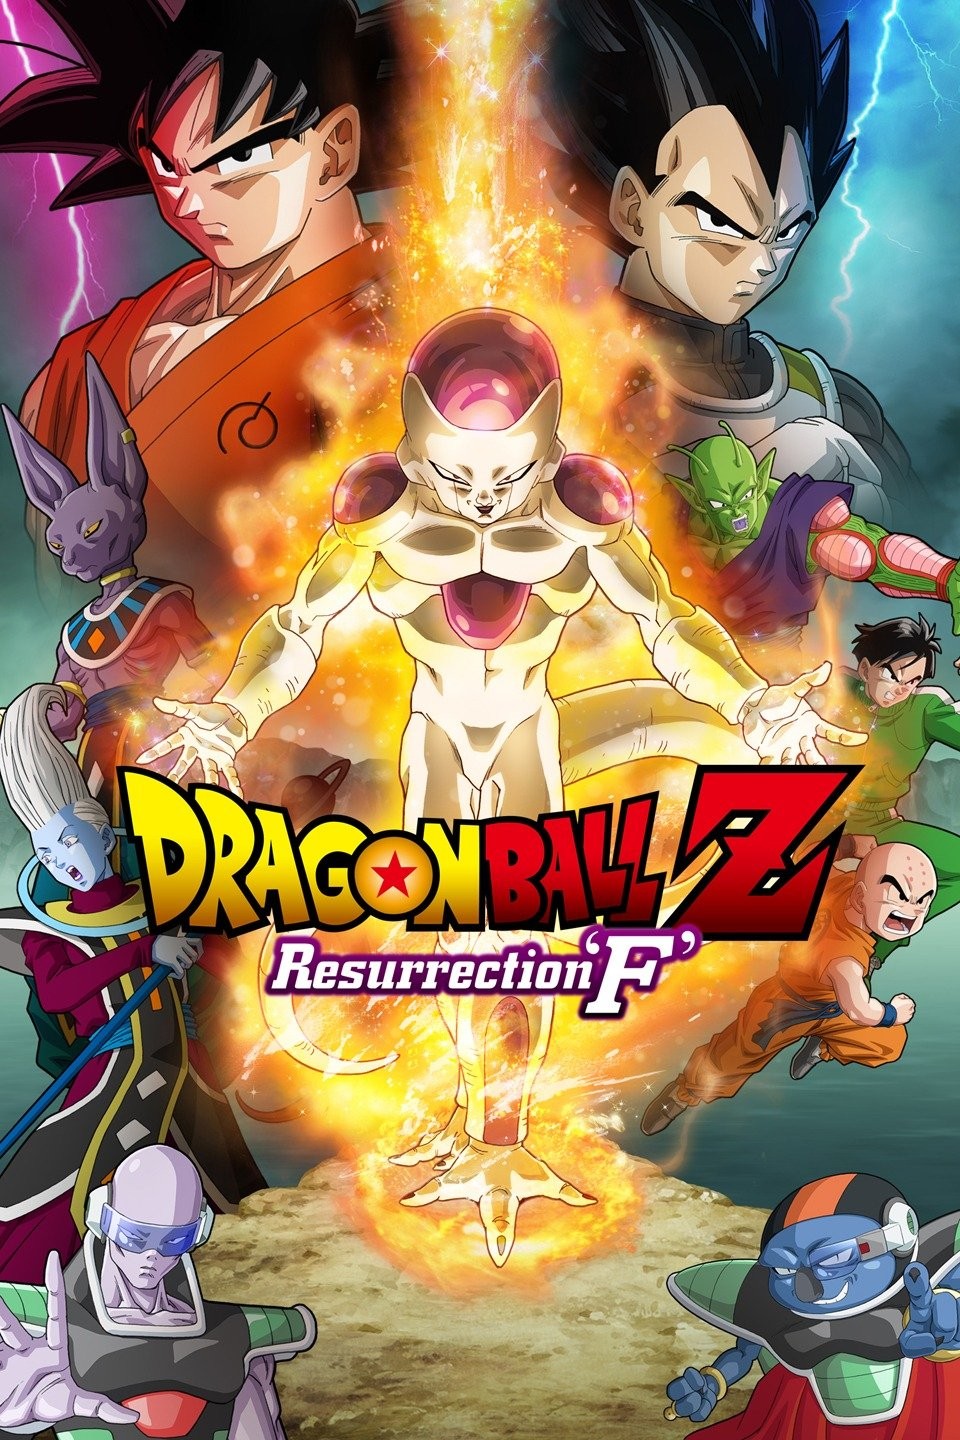 Dragon Ball Z Kai: The Final Chapters - Rotten Tomatoes